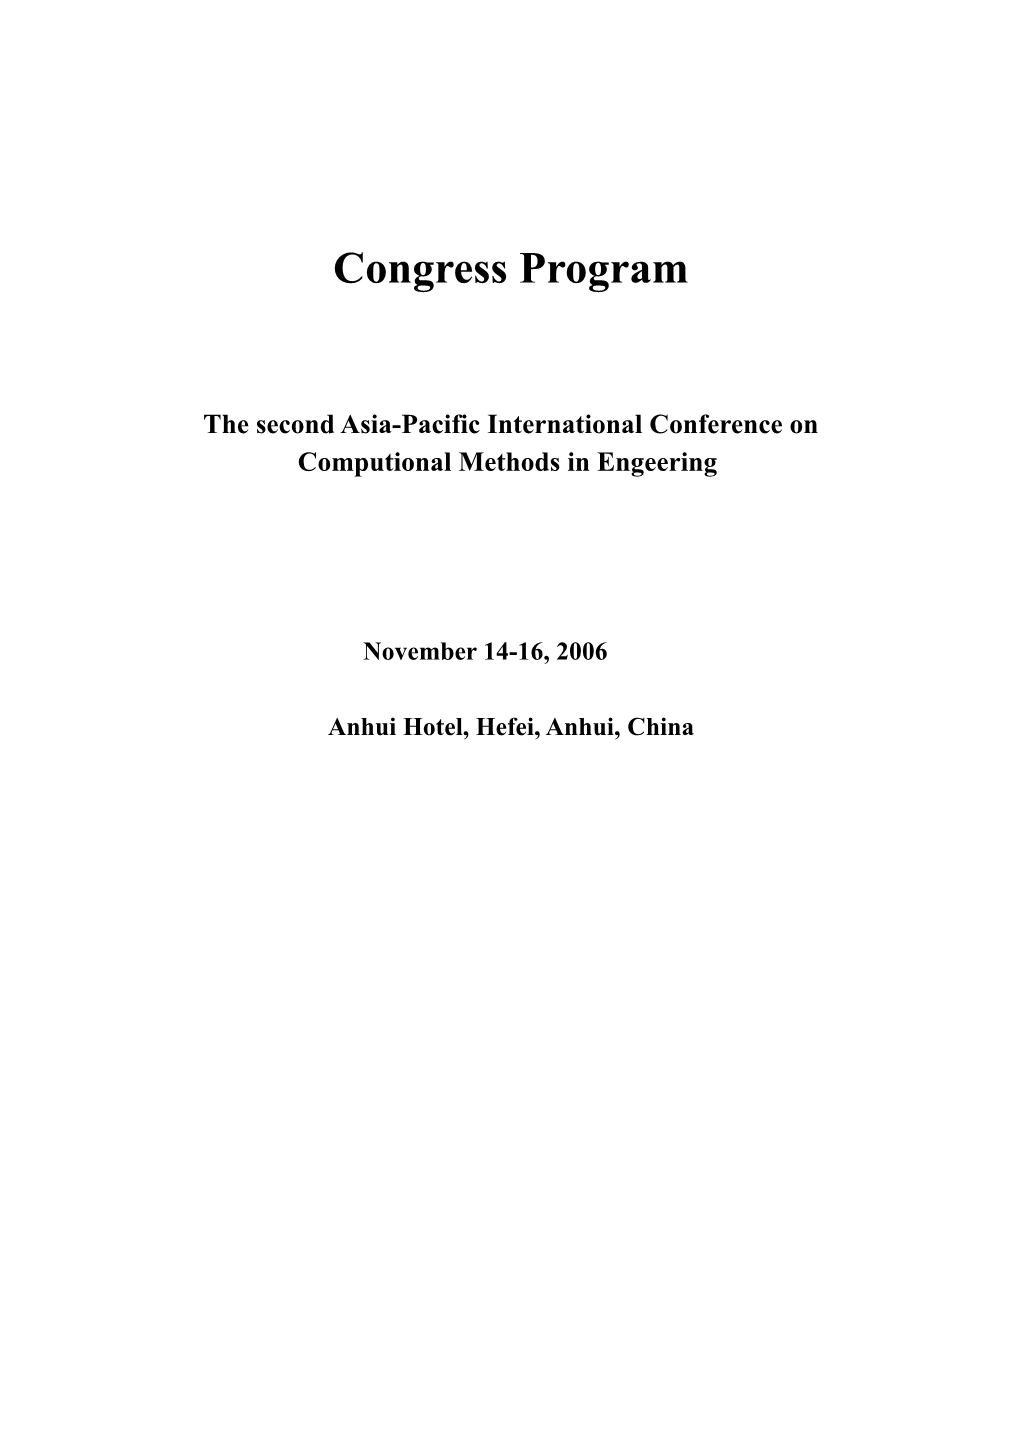 The Second Asia-Pacific International Conference on Computional Methods in Engeering